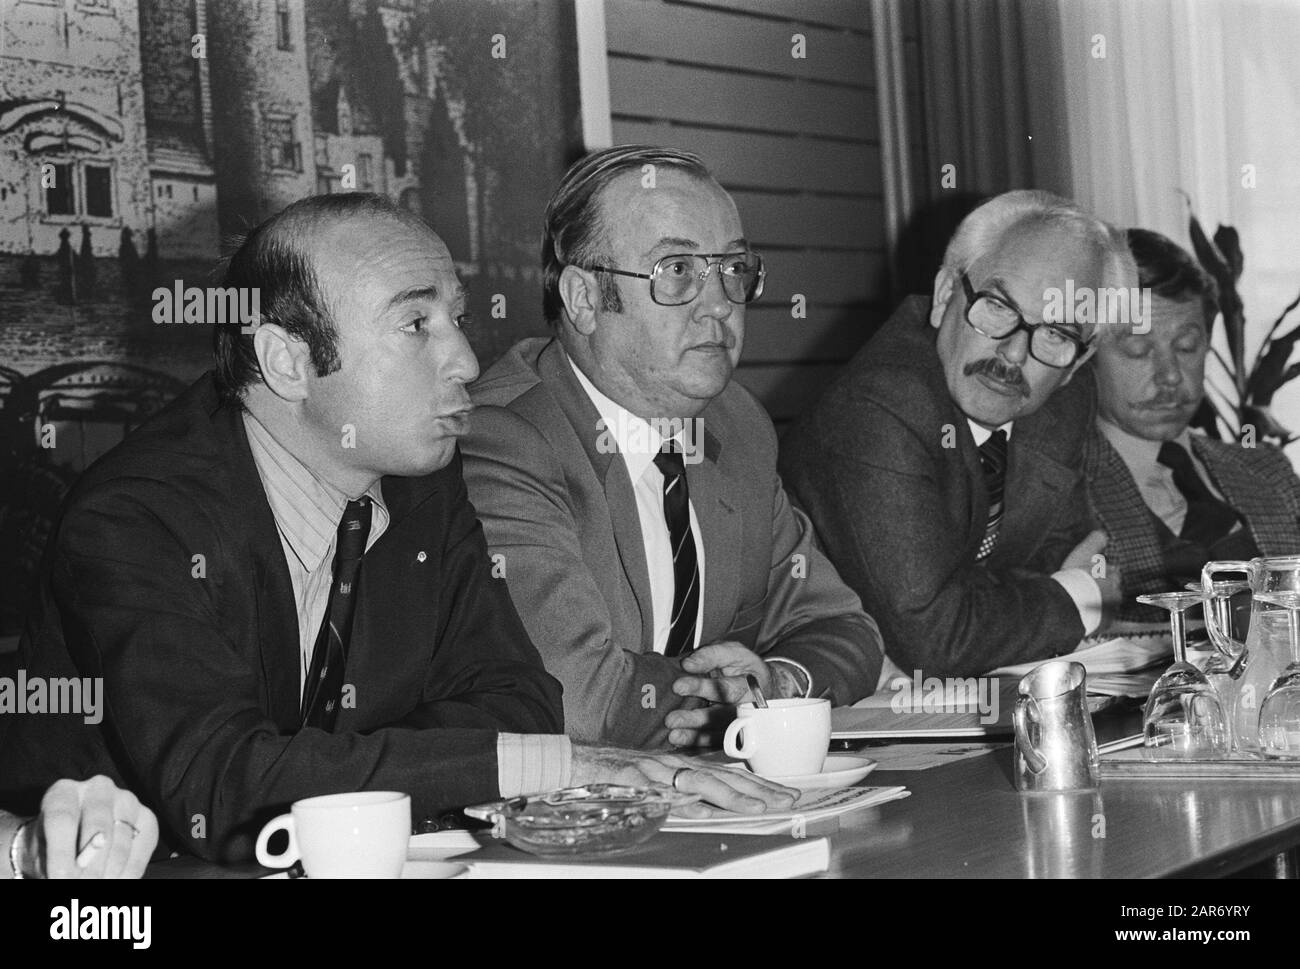 New political party Realists 81 presented election program during press conference in Nieuwspoort Date: 19 March 1981 Keywords: press conferences Personal name: Hans Knoop, Quasten Stock Photo